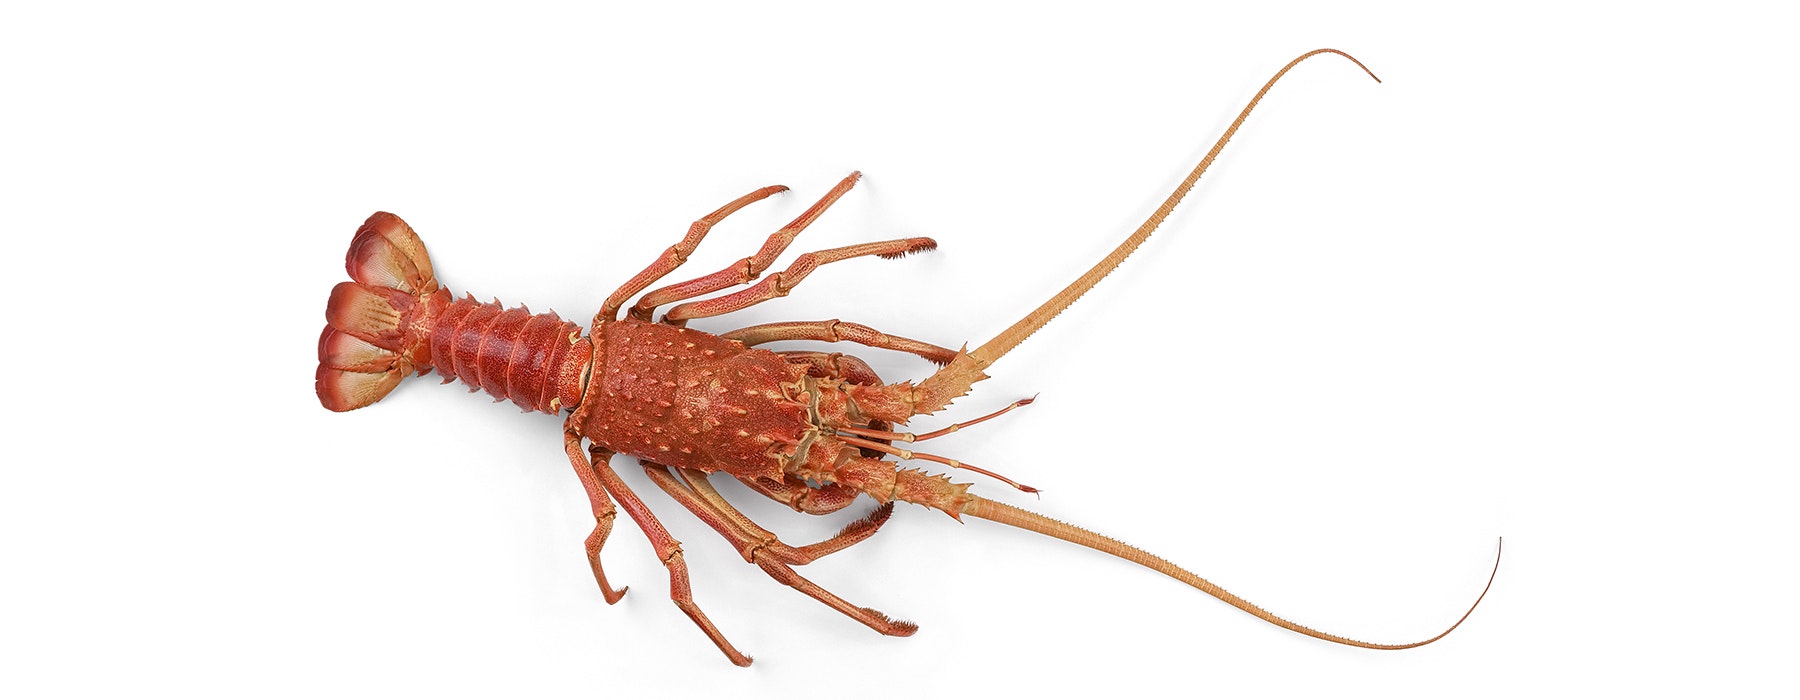 A spiny lobster on a white background